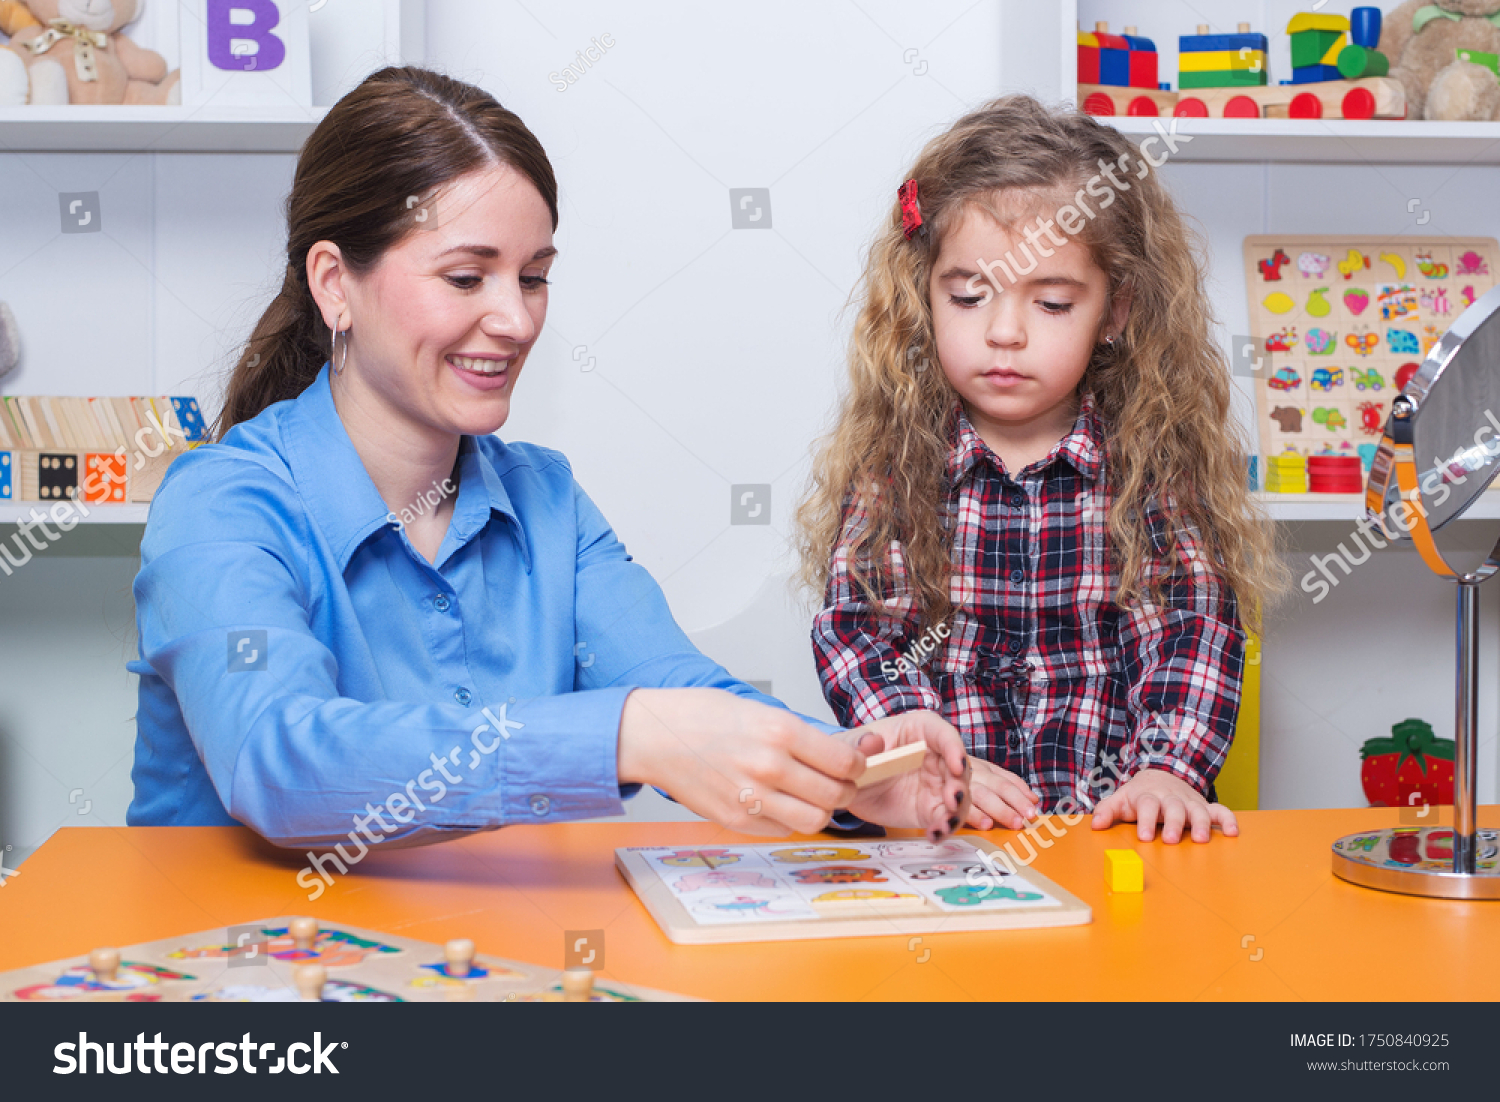 Toddler girl in child occupational therapy session doing sensory playful exercises with her therapist. #1750840925